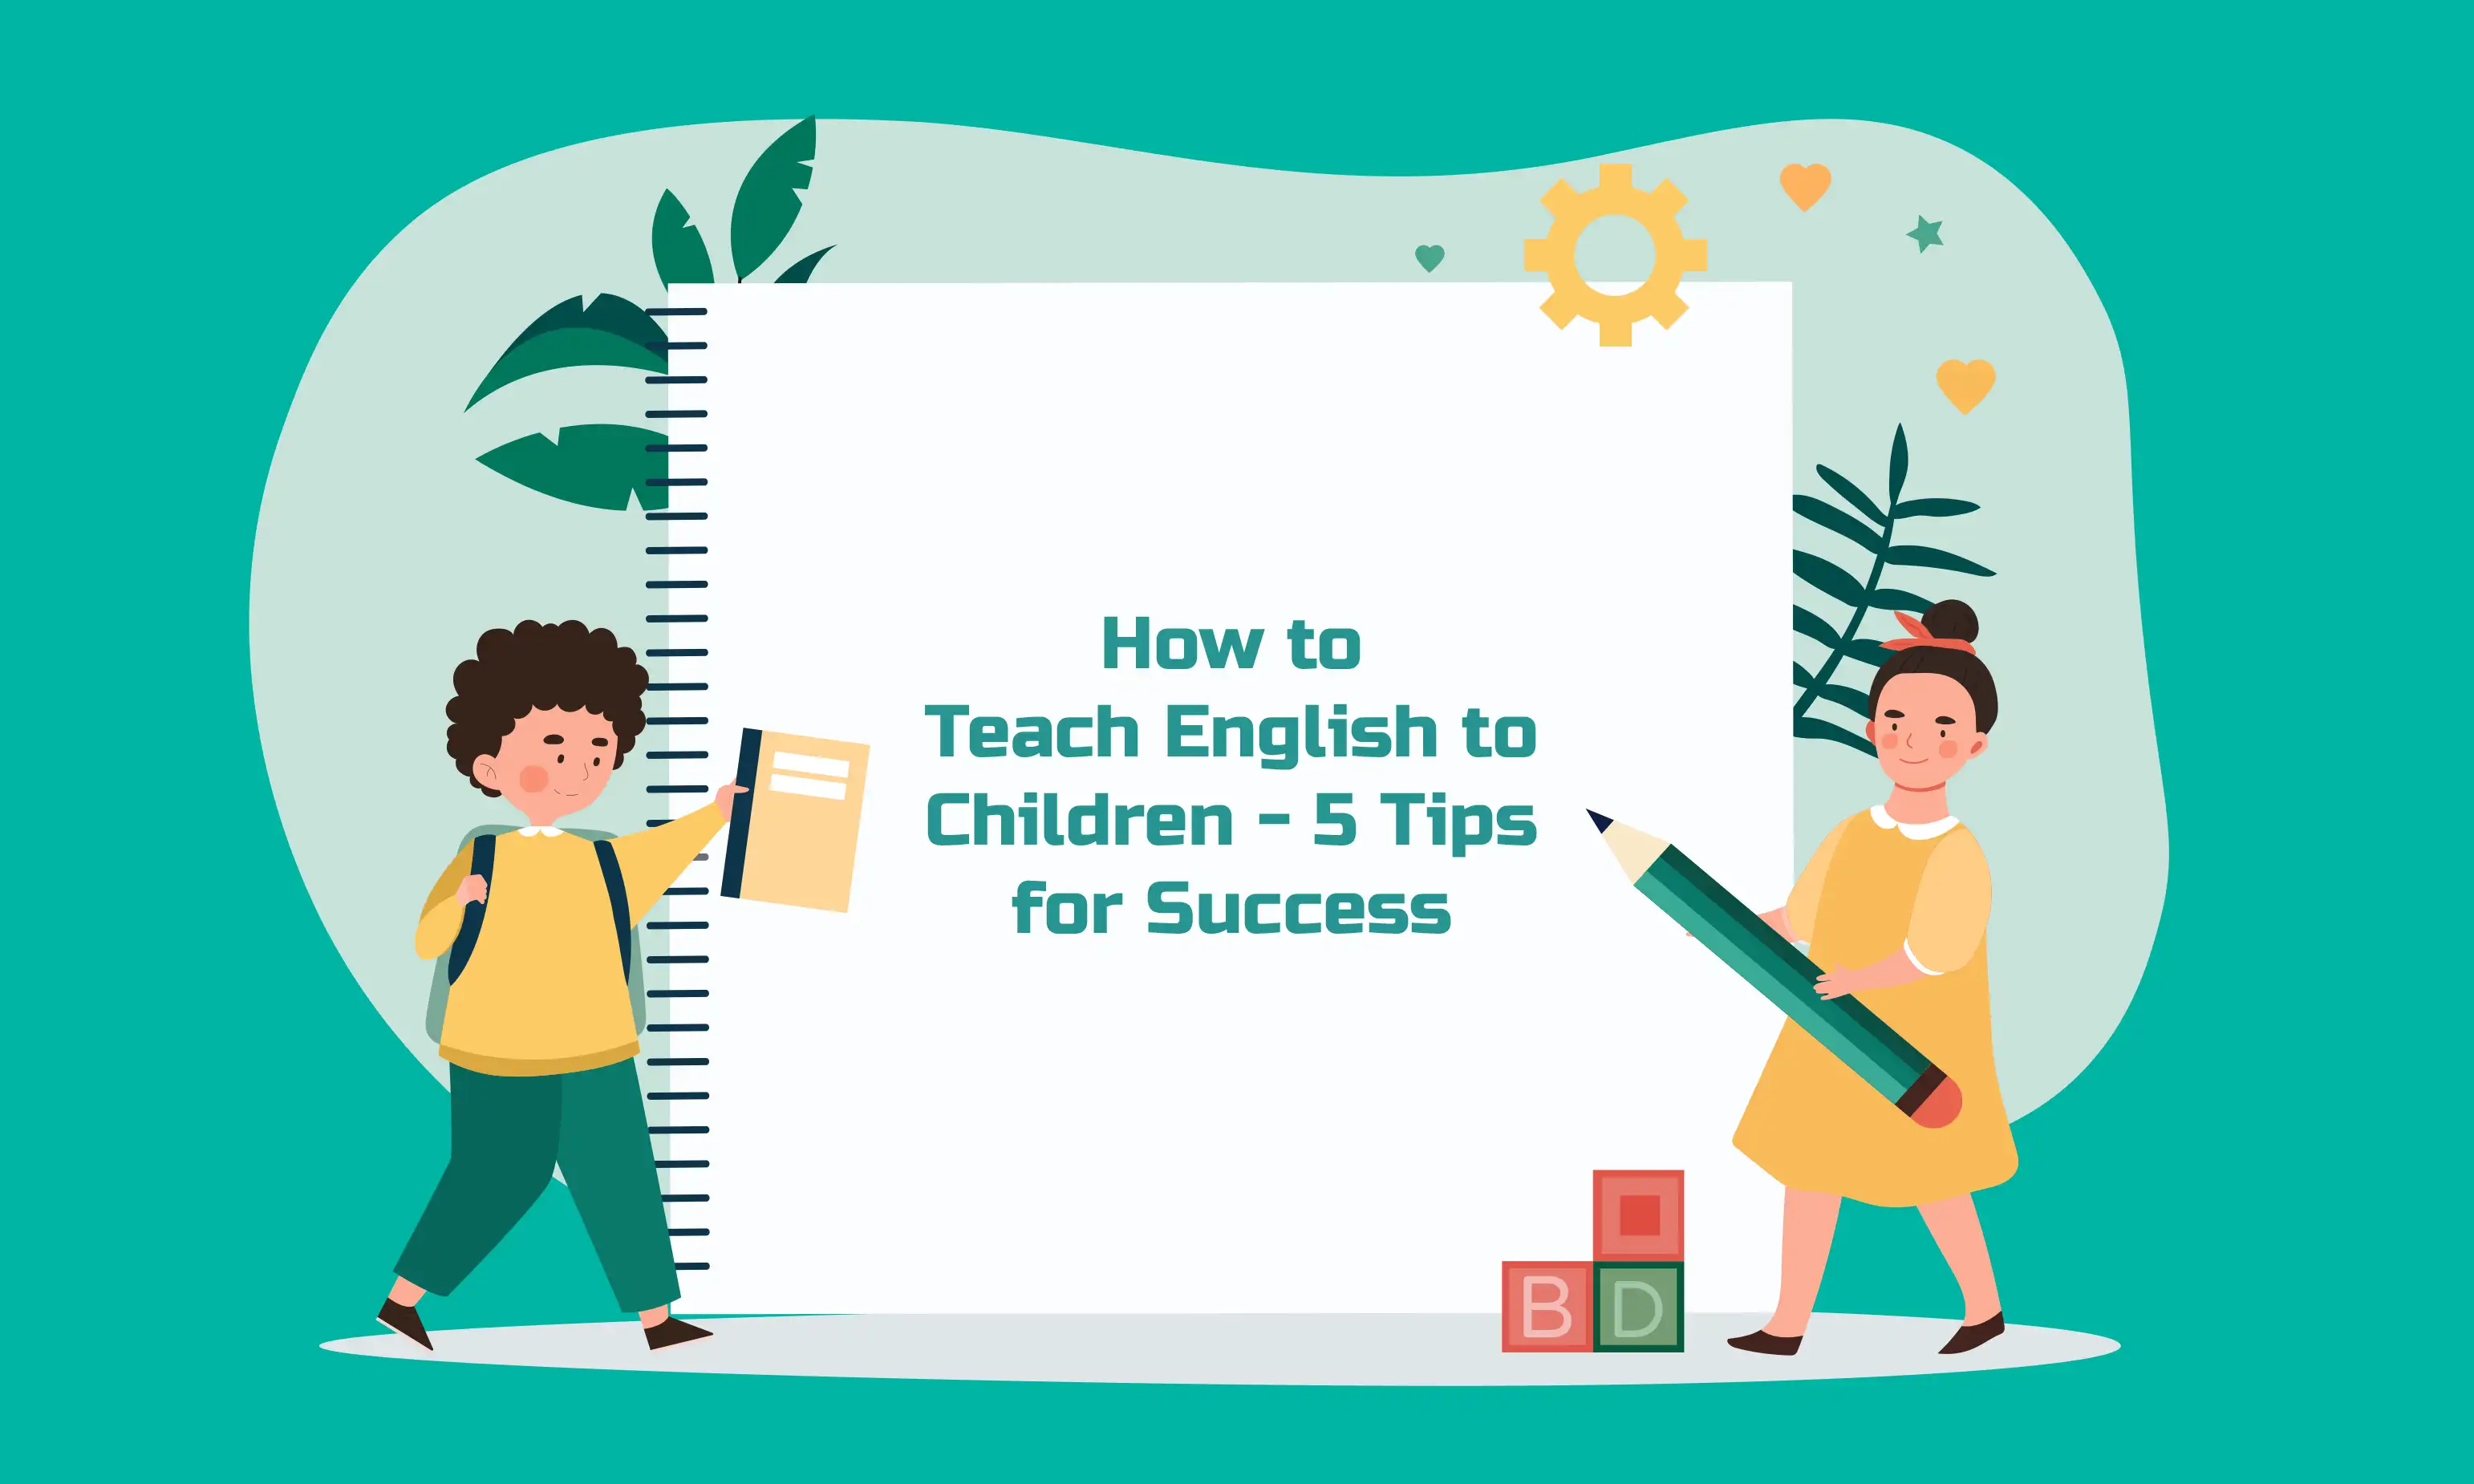 How to Teach English to Children - 5 Tips for Success